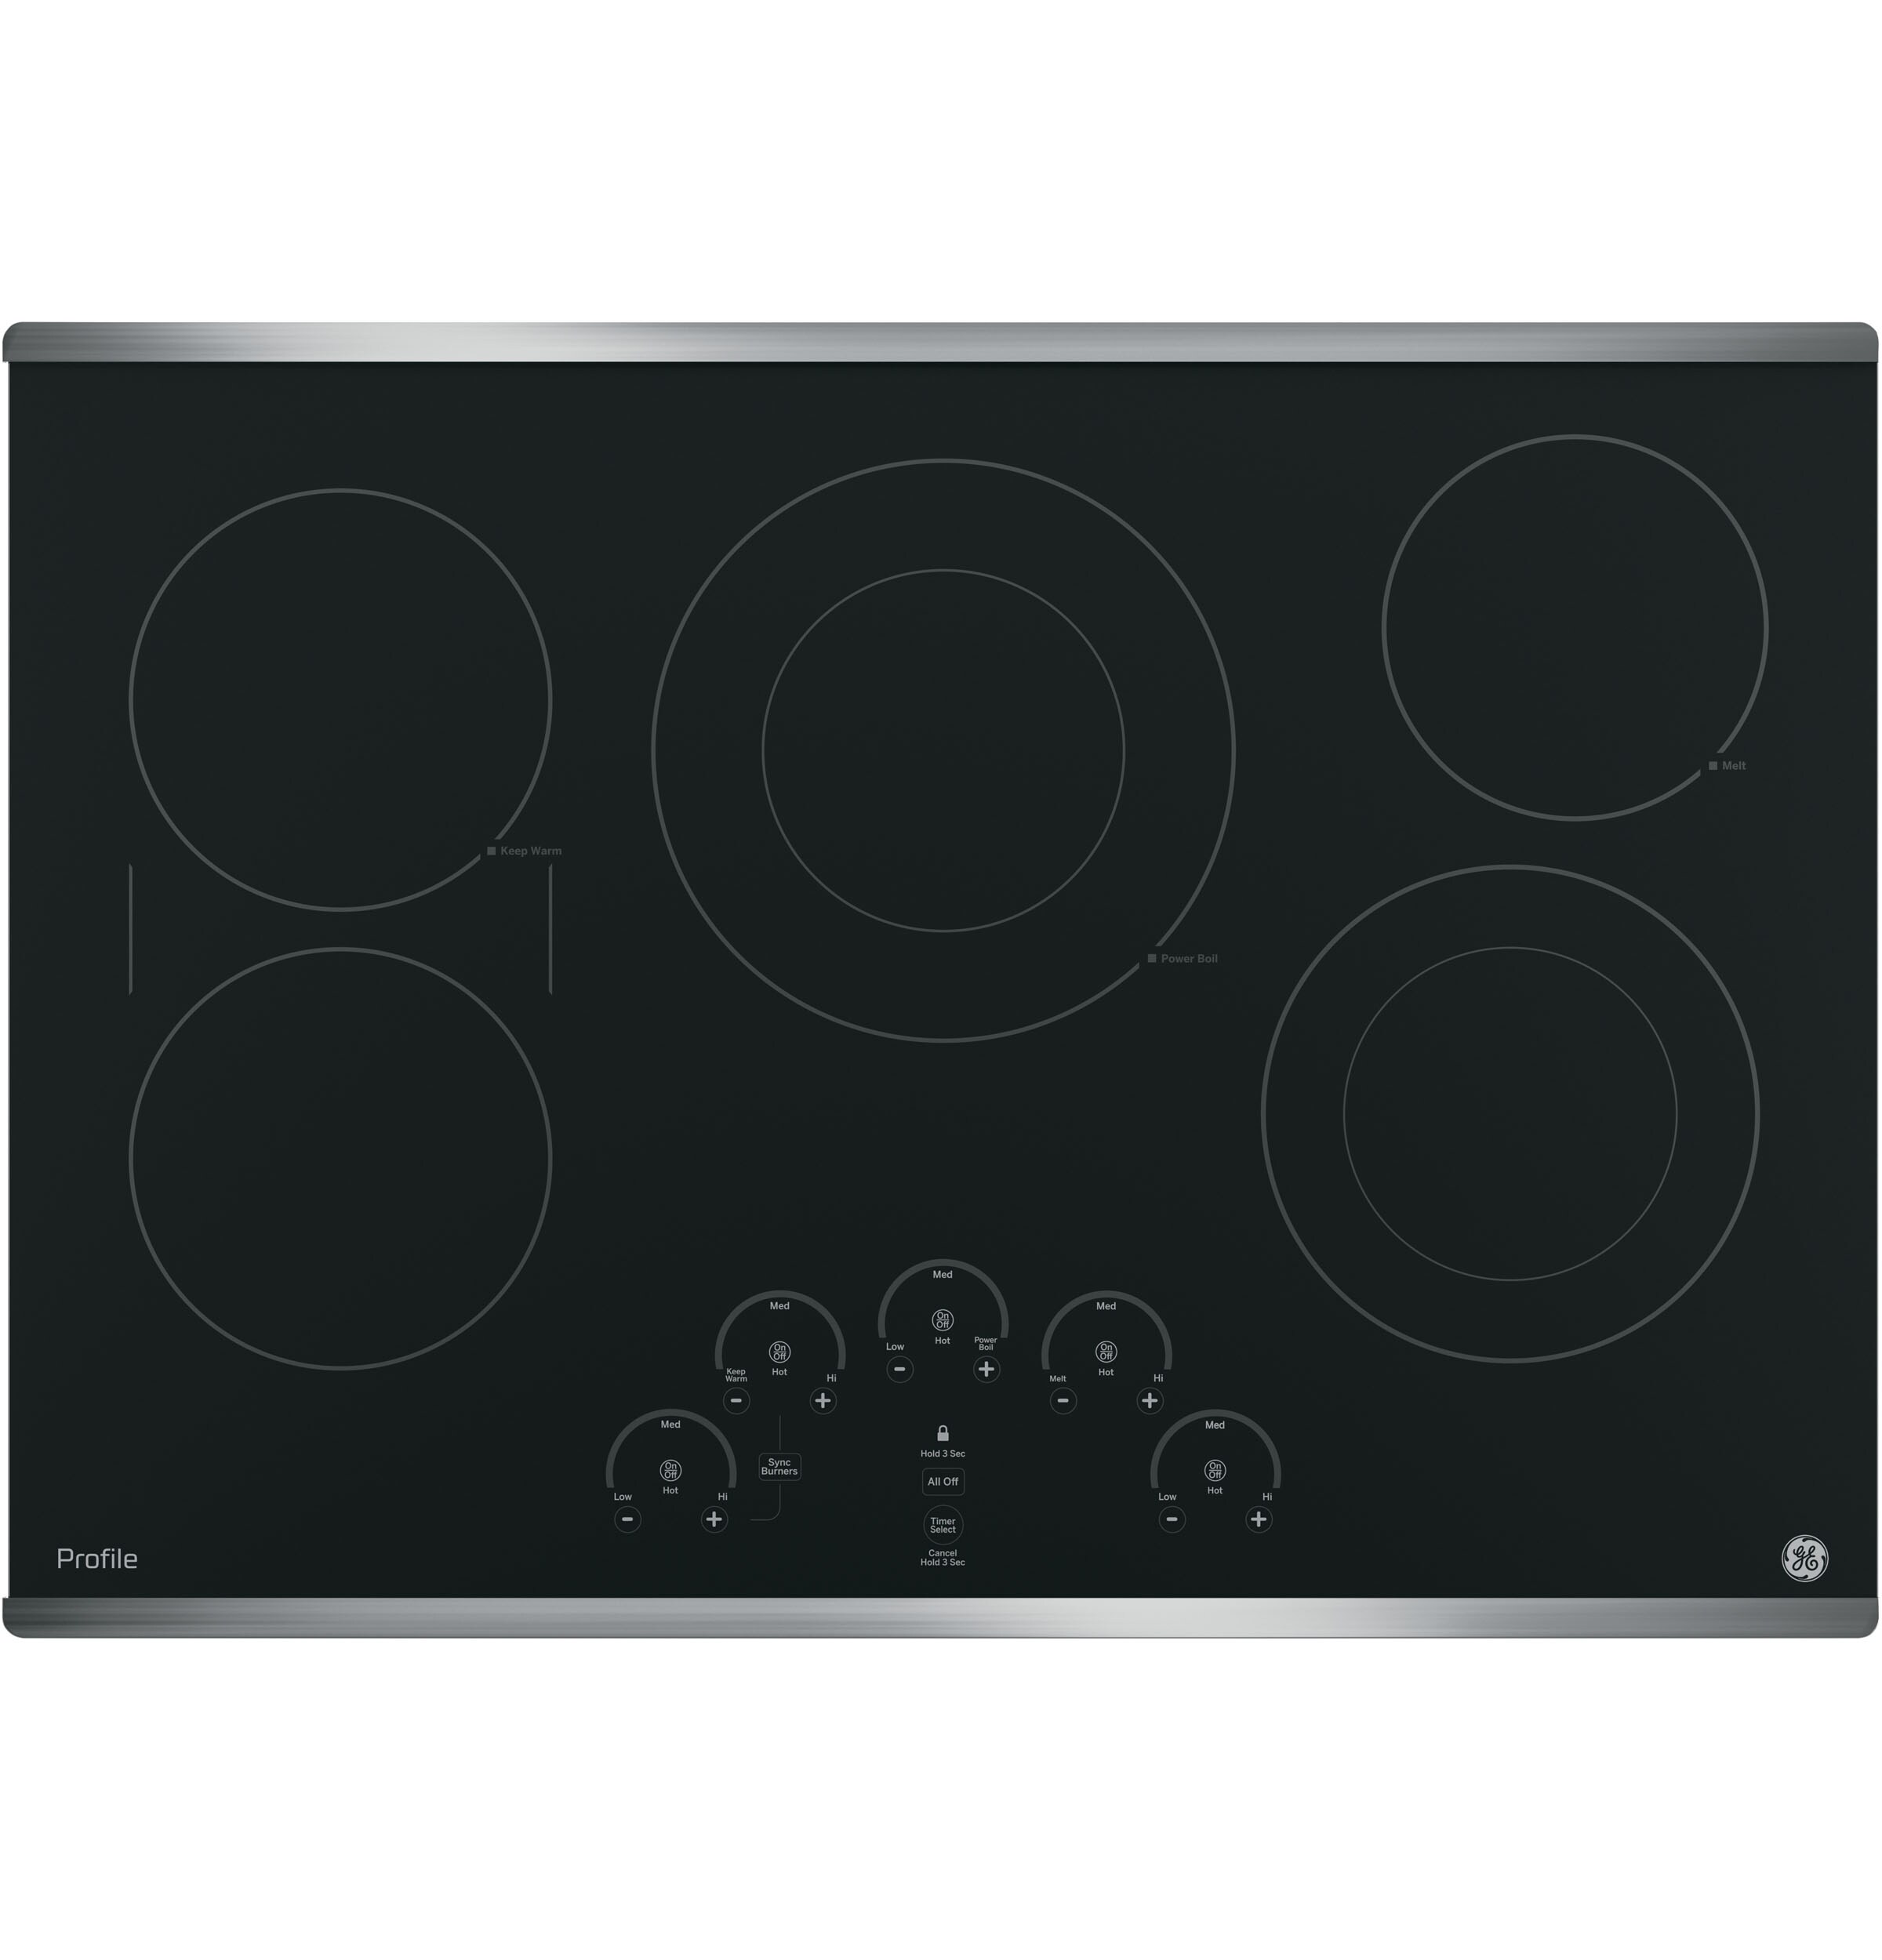 Hard Wired No Plug 220-240V 8400W Glass Cooktop with Timer Child Safety Lock Touch Control Electric Cooktop 30 Inch 5 Burner Built-in Radiant Electric Stove Top with Glass Protection Metal Frame 